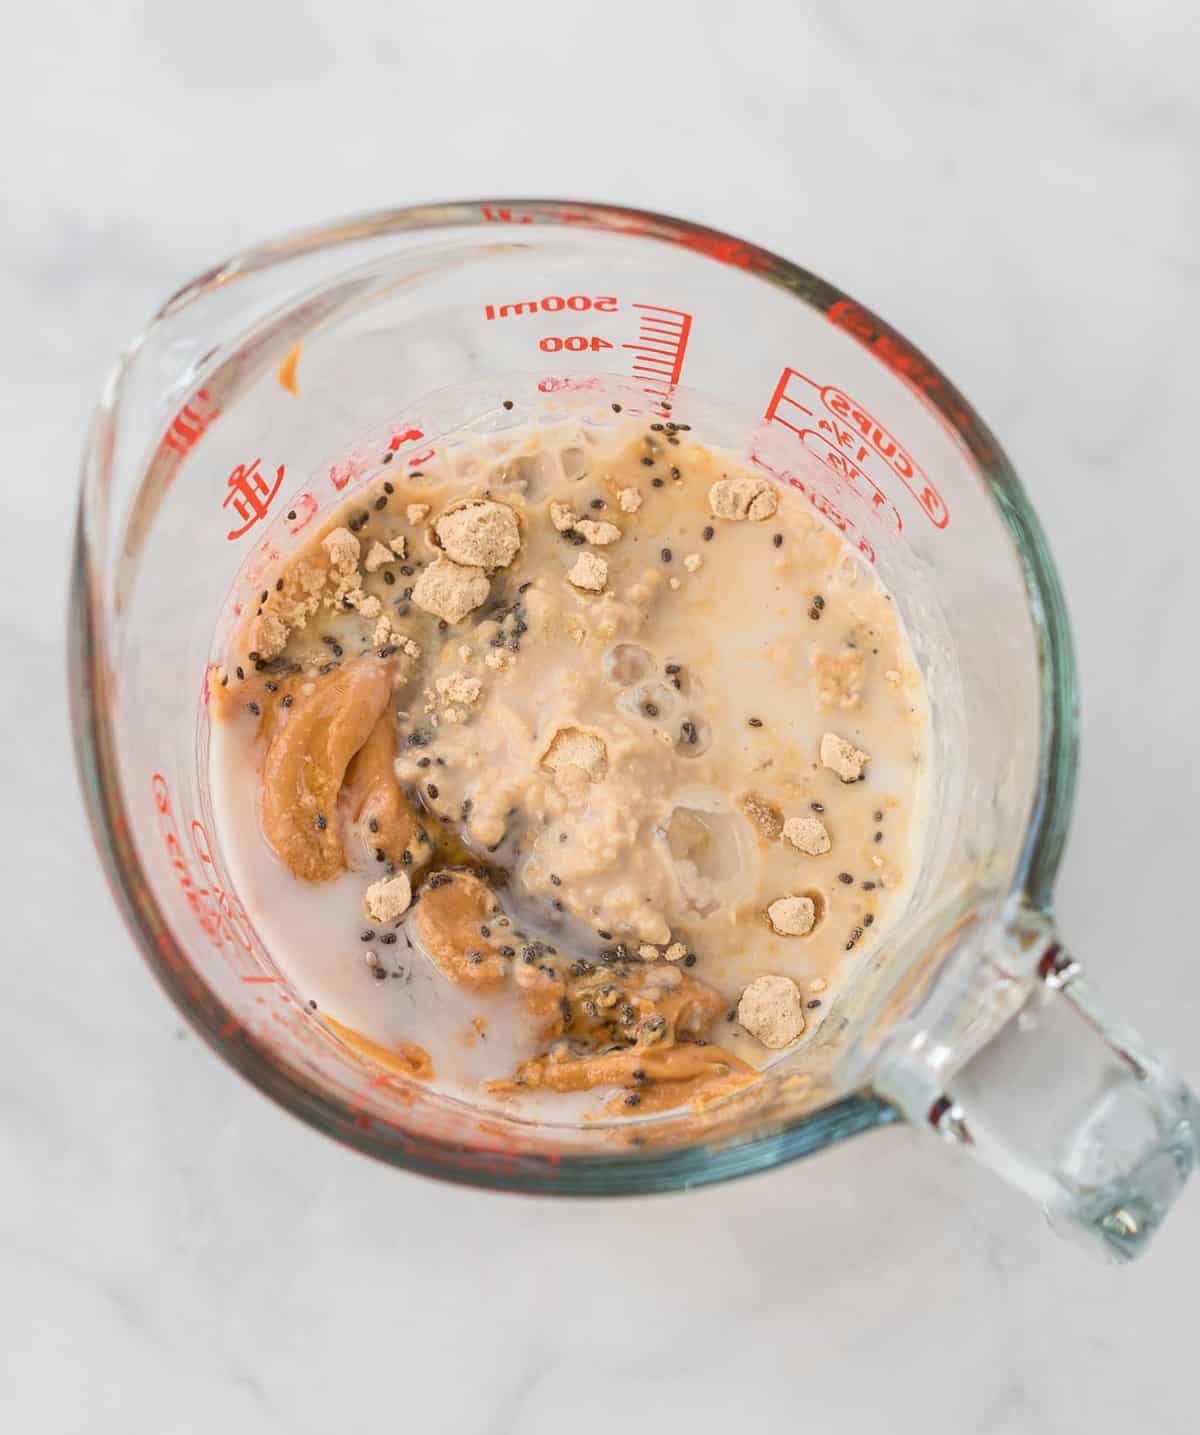 overnight oats in a glass measuring cup